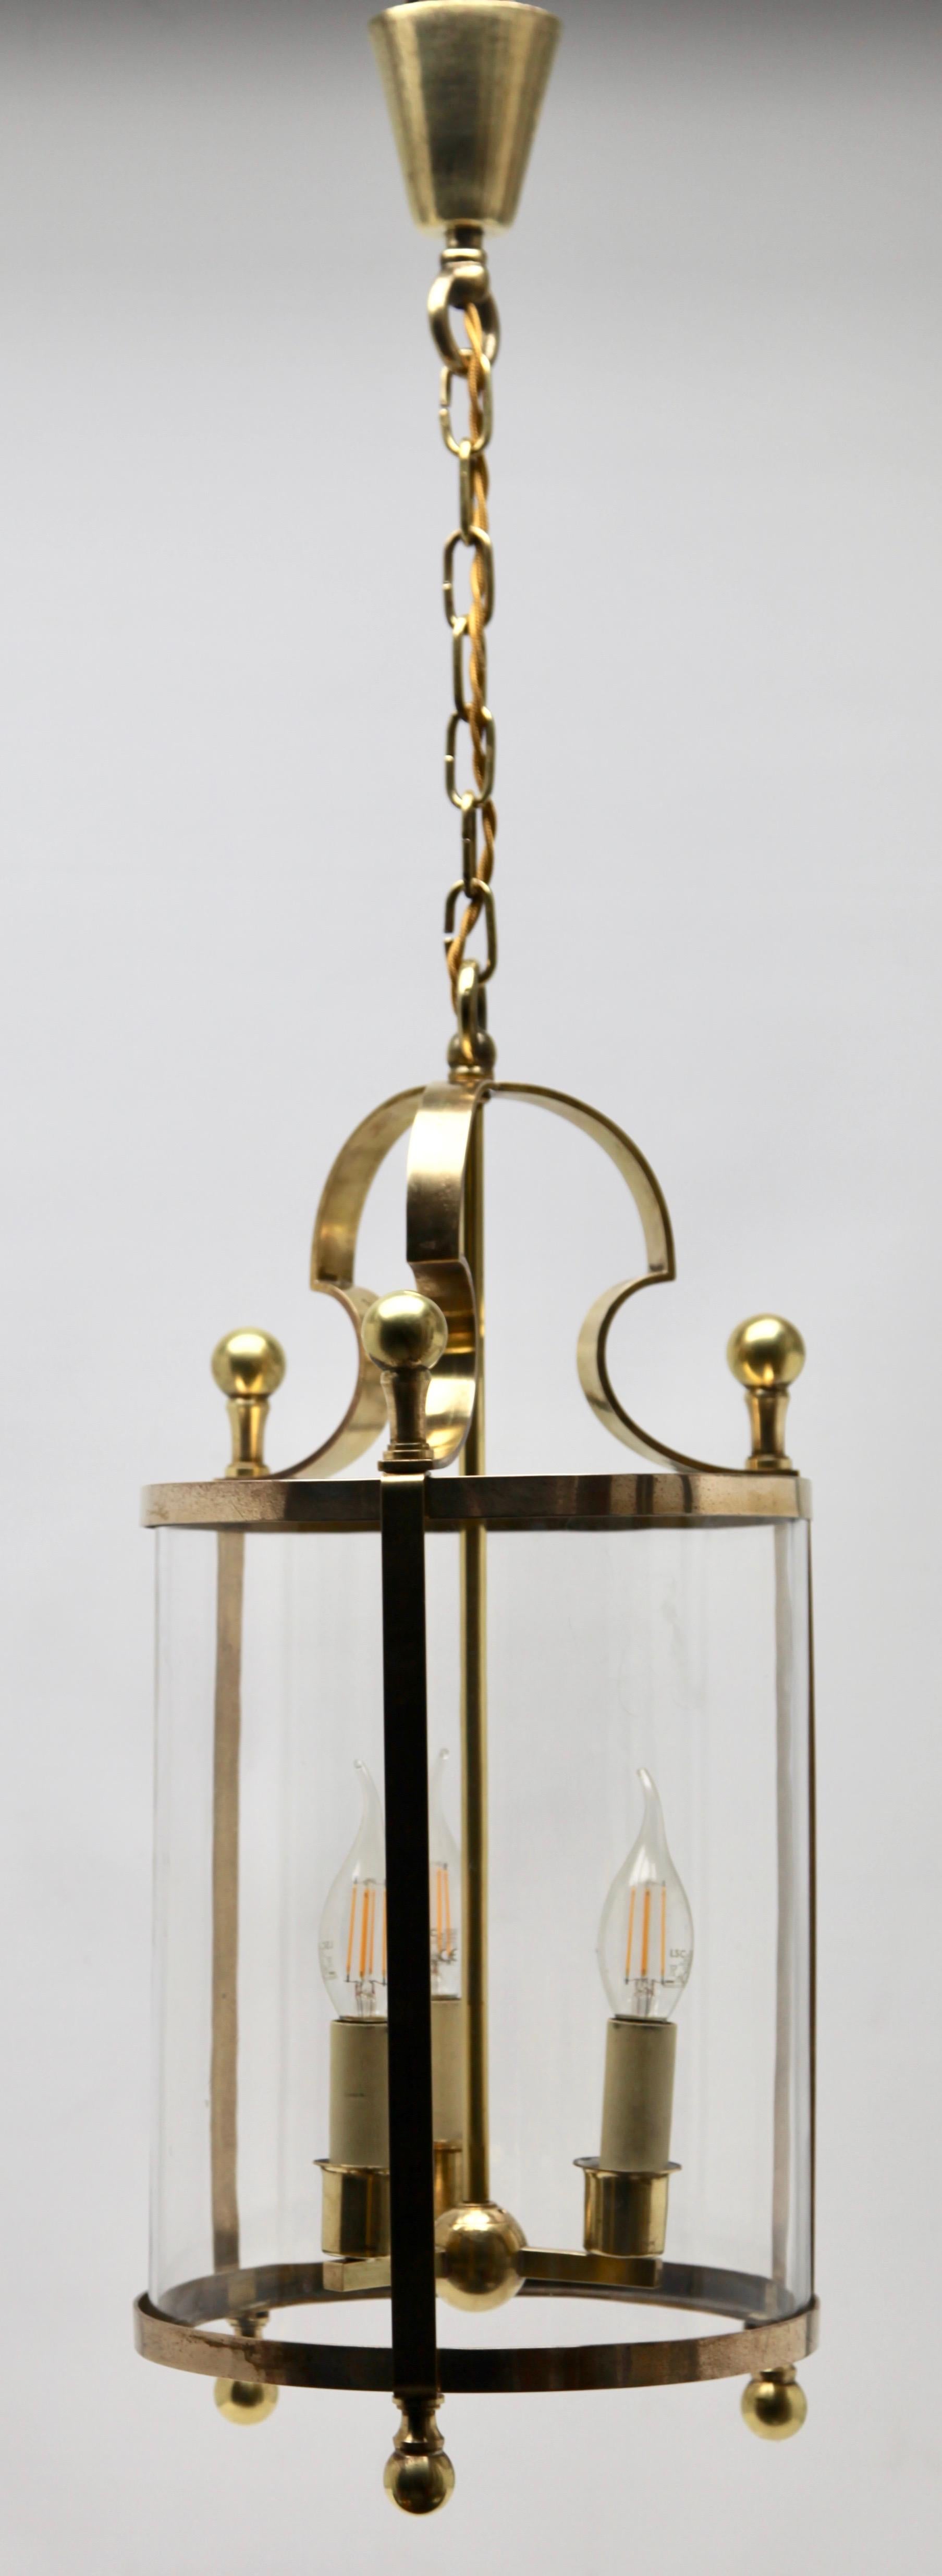 Italian Solid Brass and Glass Lantern or Pendant Lamp For Sale